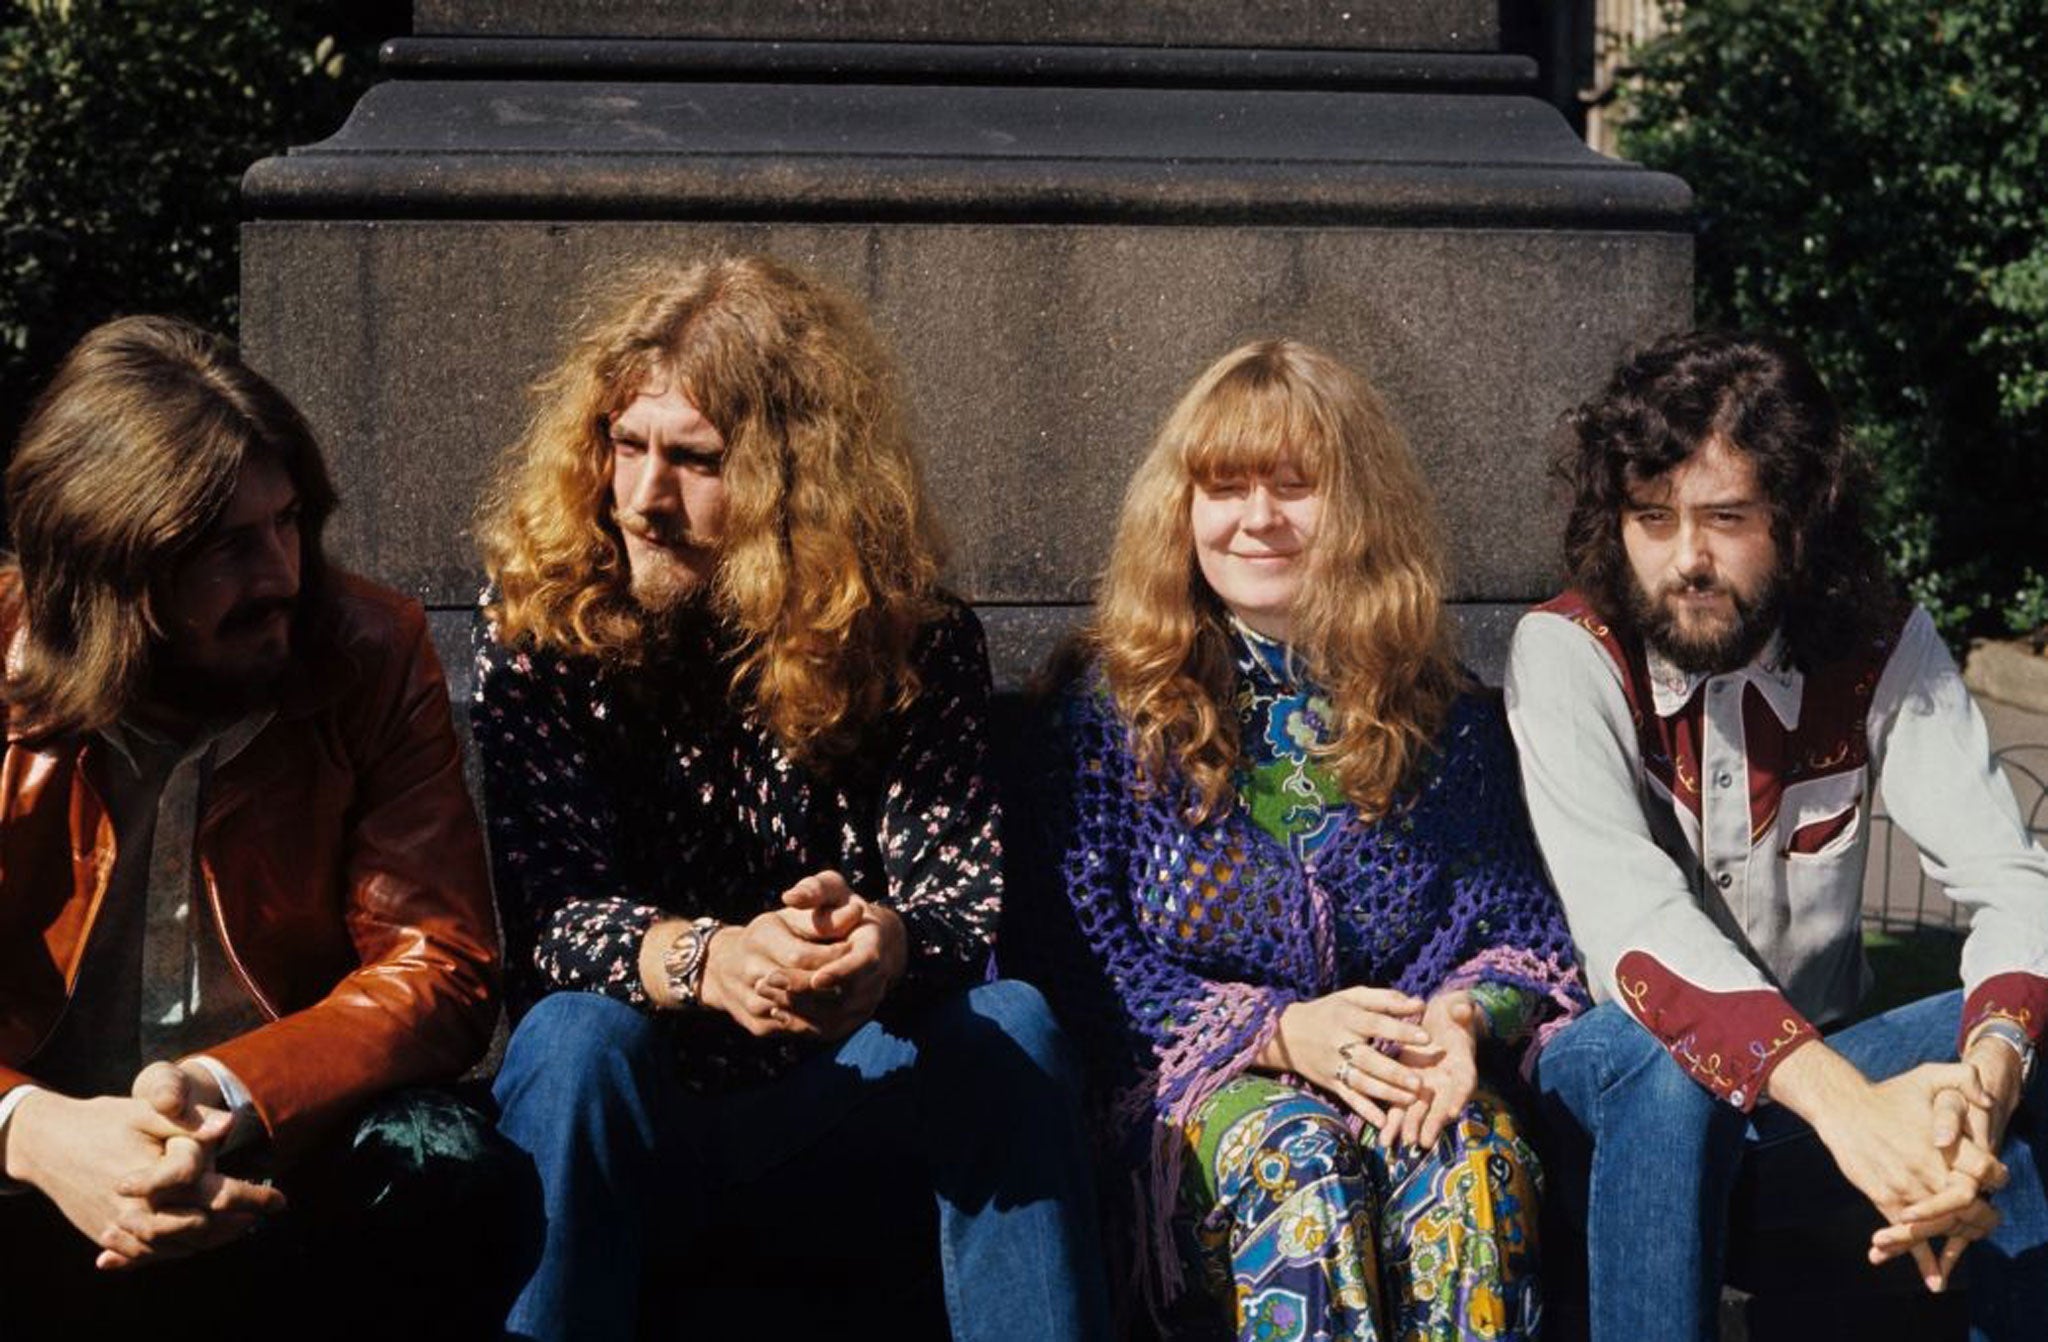 Dazed and confused: Sandy Denny with John Bonham, Robert Plant and Jimmy Page in 1970